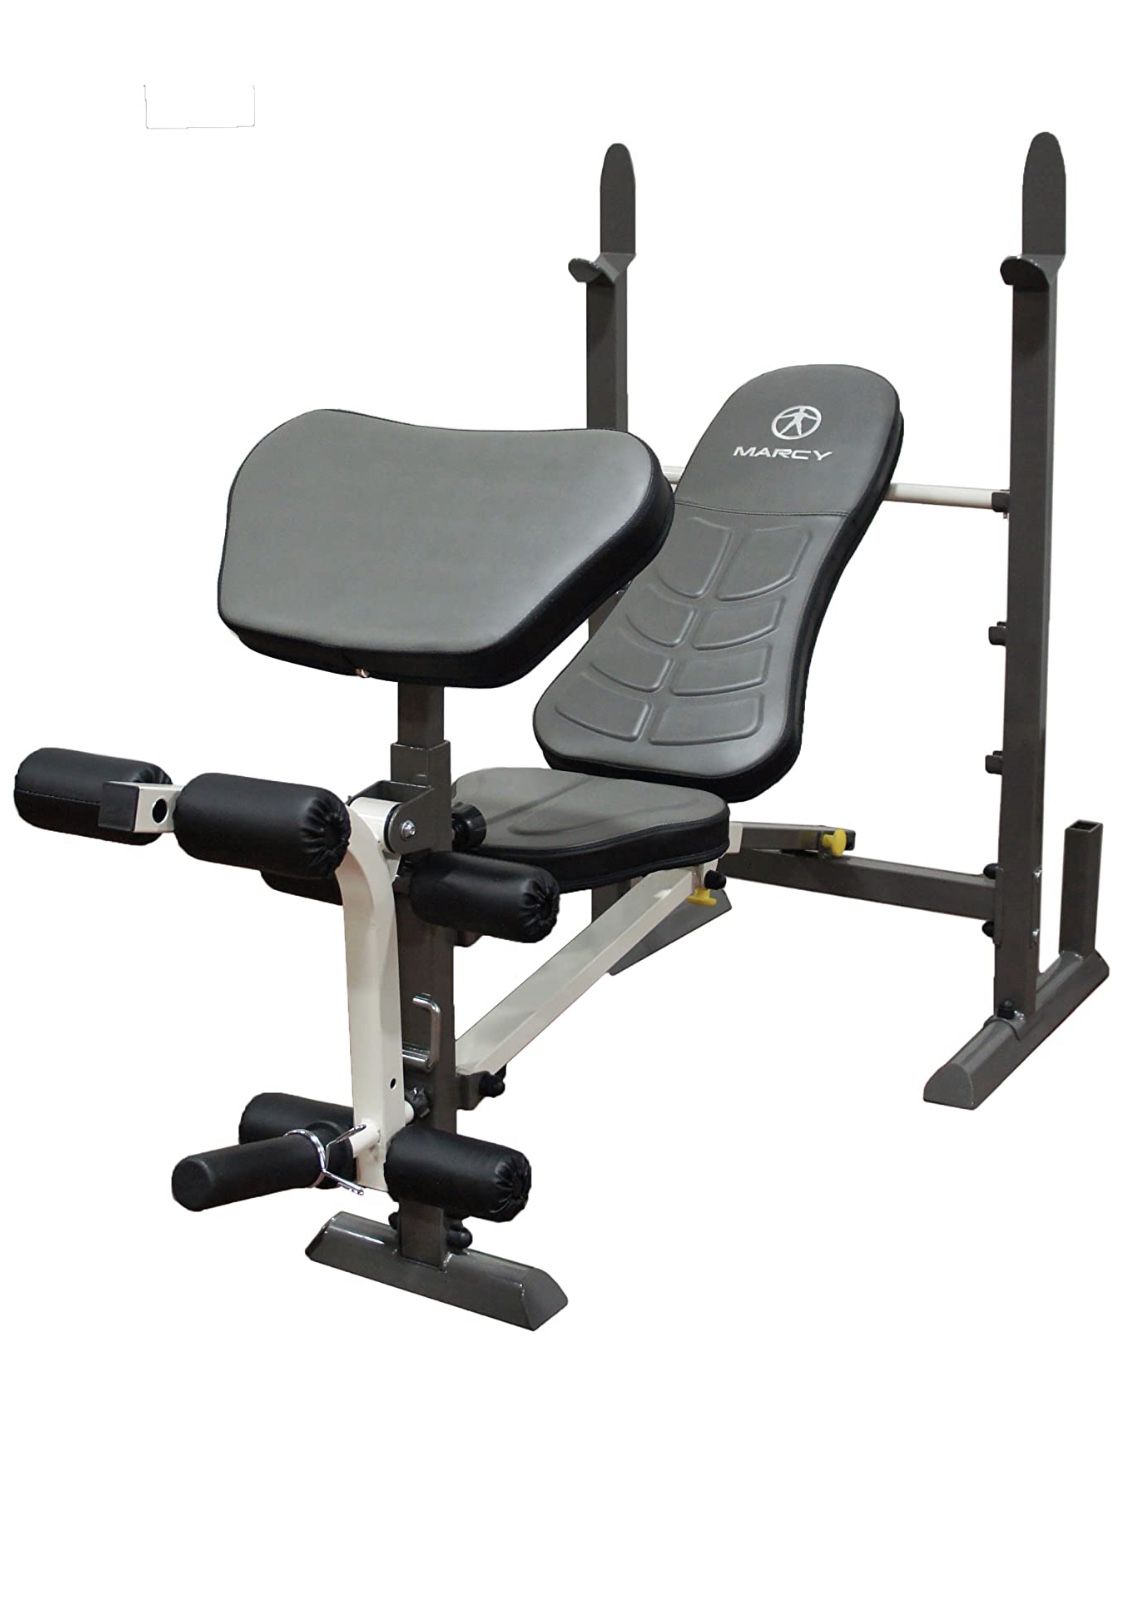 Foldable weight bench